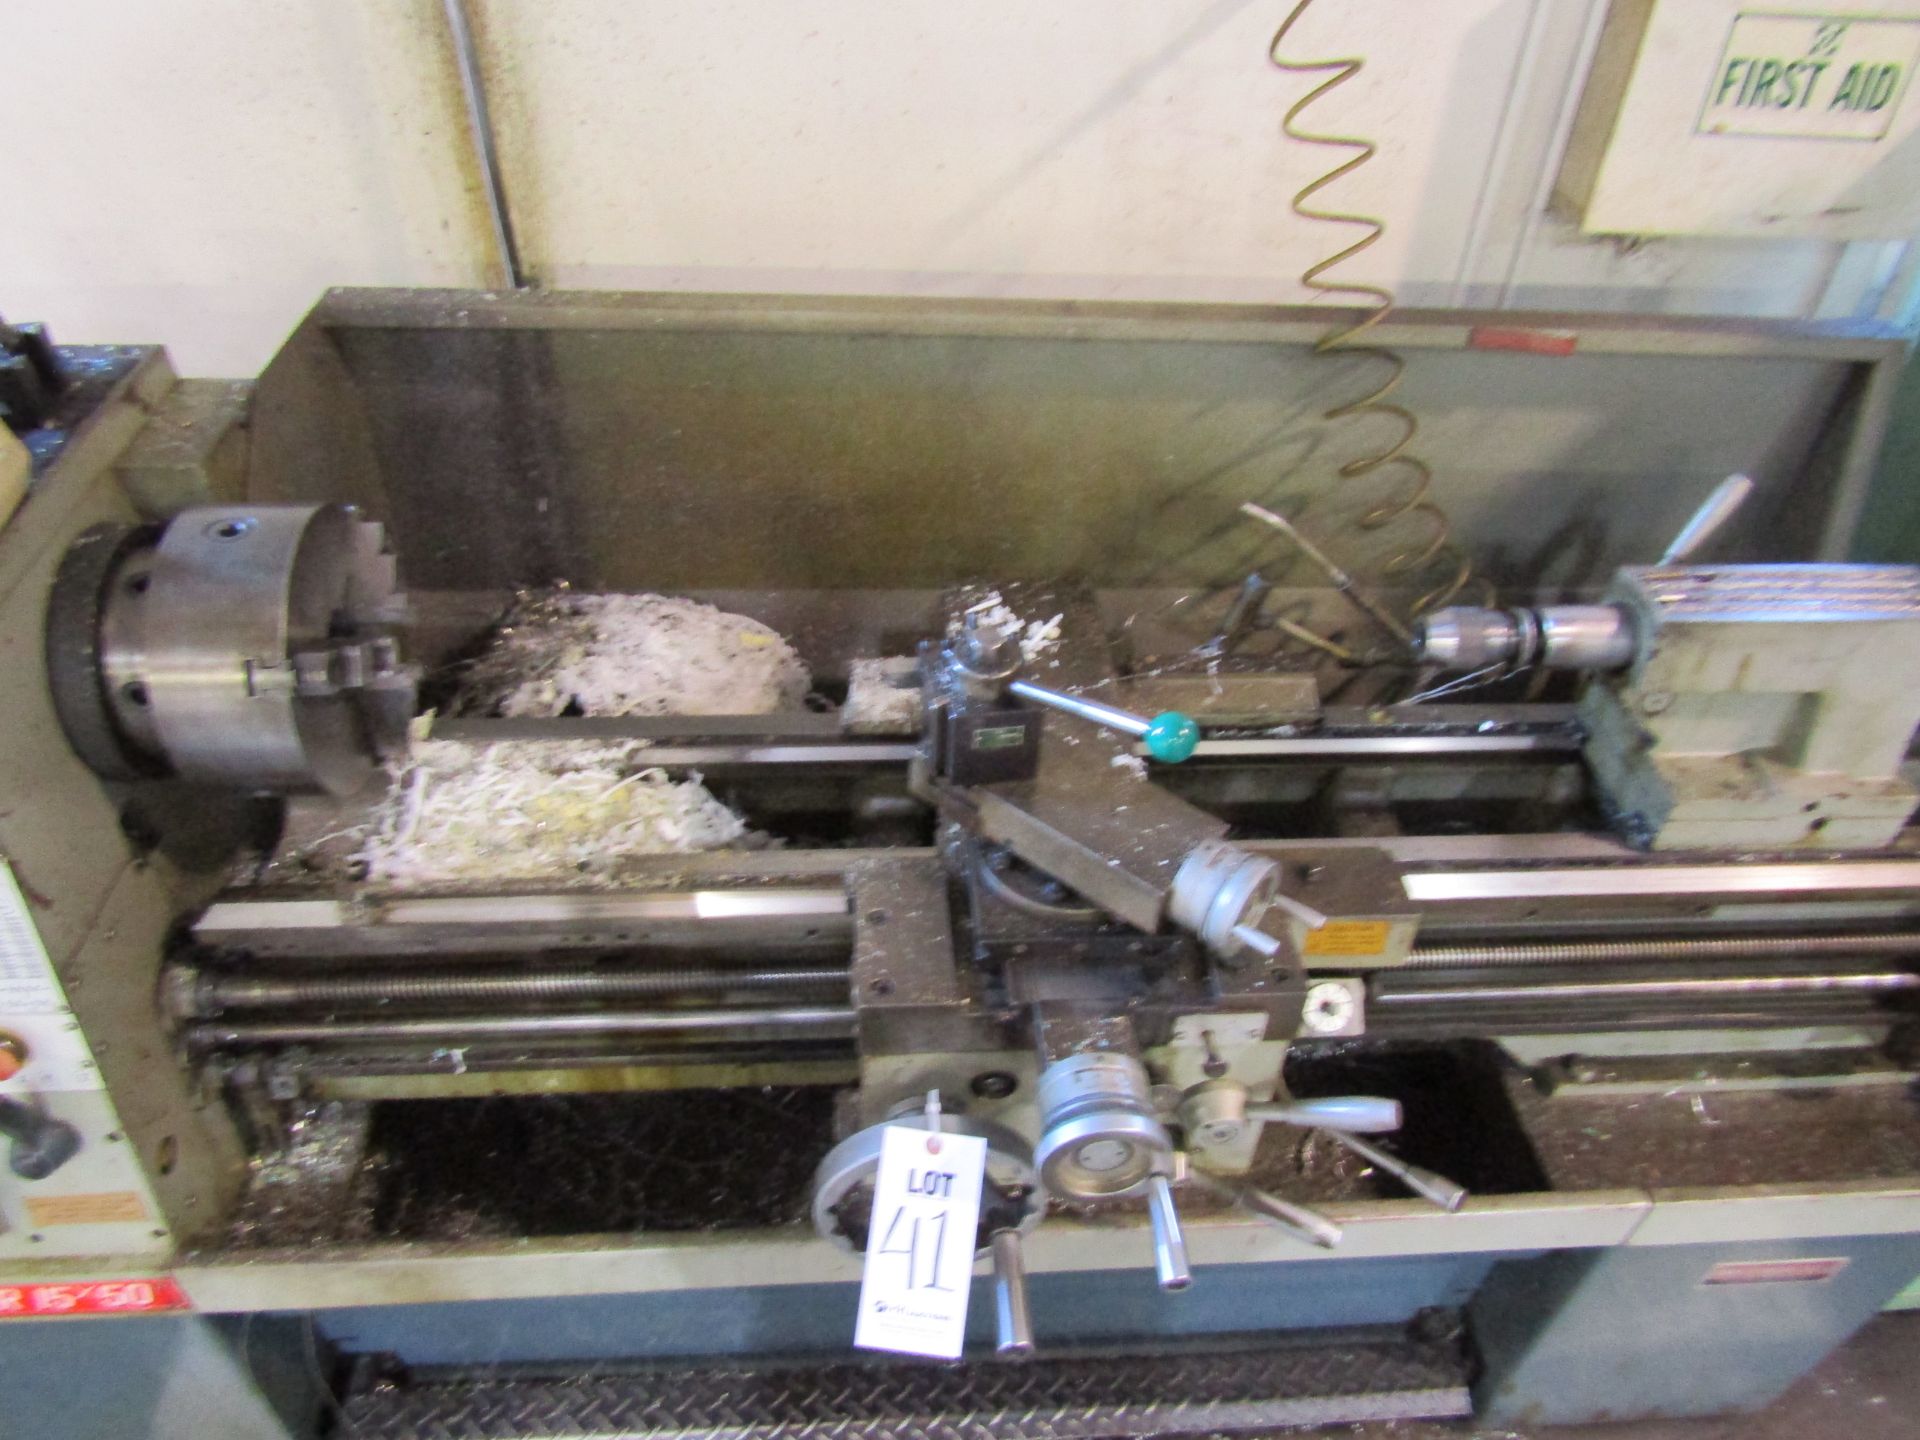 AMERICAN MACHINE TOOL MANUAL LATHE, MODEL TURNMASTER 15" X 50". LOT TO INCLUDE TOOLING IN/ON - Image 5 of 8